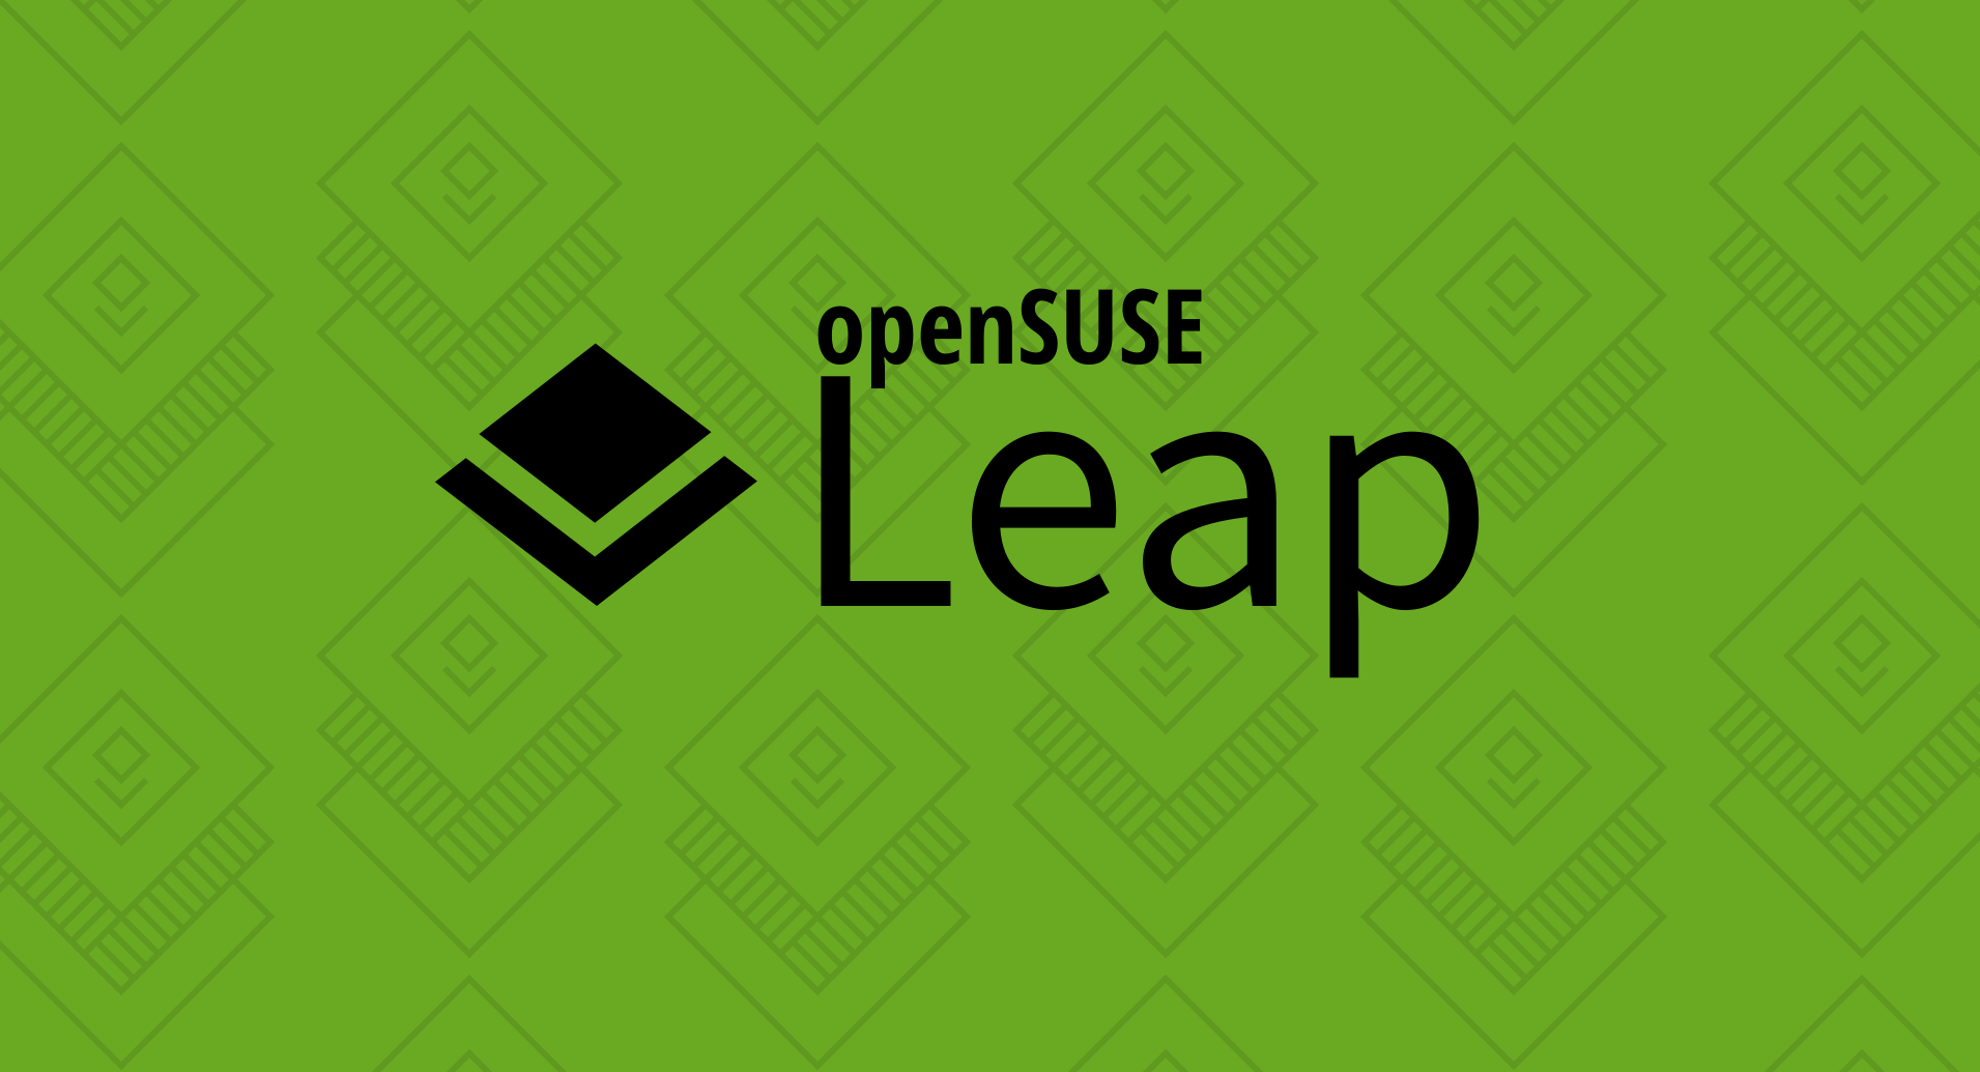 openSUSE Leap 15.2 Enters Release Candidate Phase